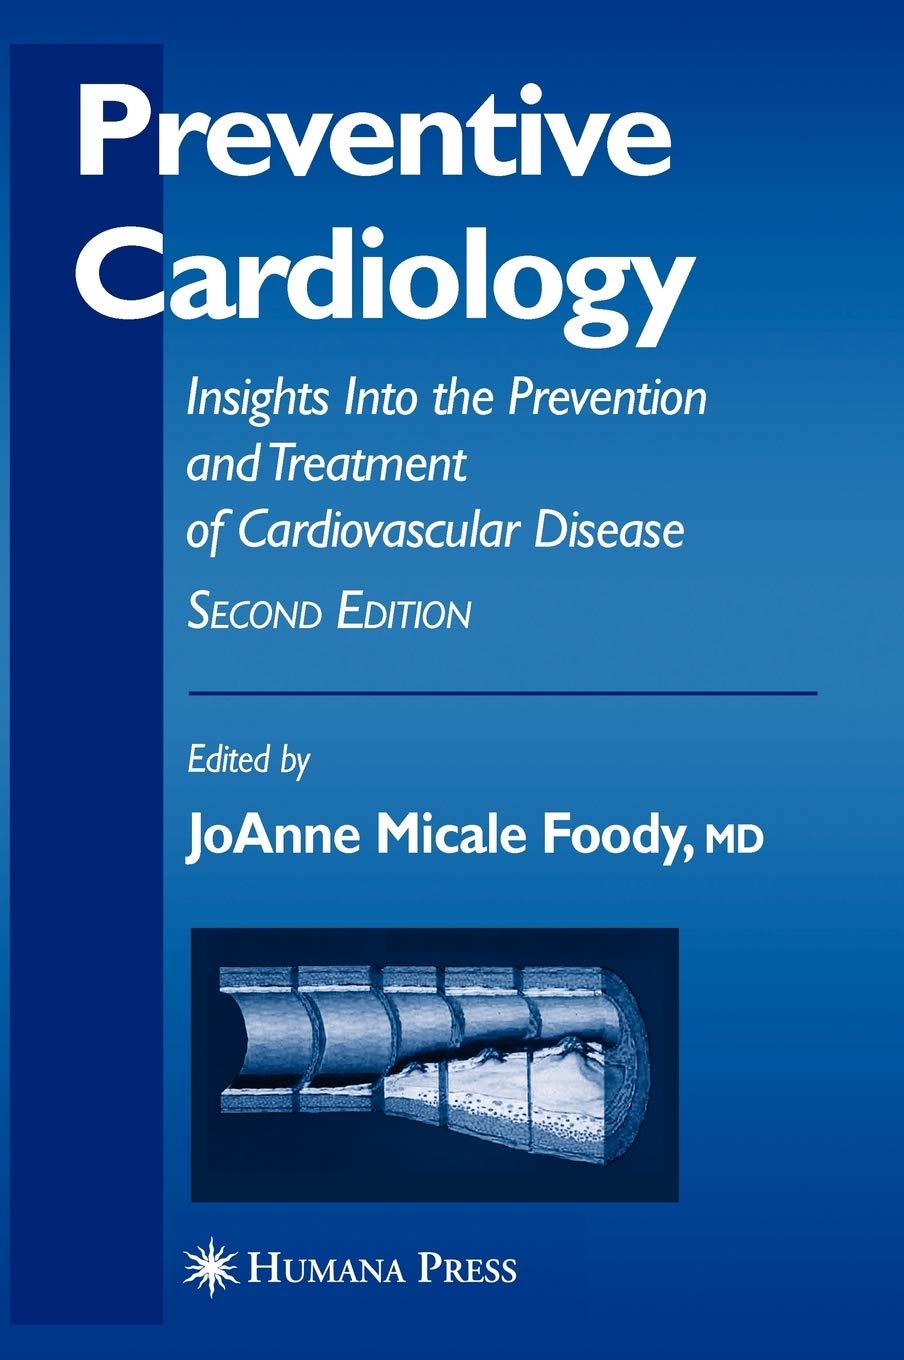 Preventive Cardiology: Insights Into the Prevention and Treatment of Cardiovascular Disease (Contemporary Cardiology)